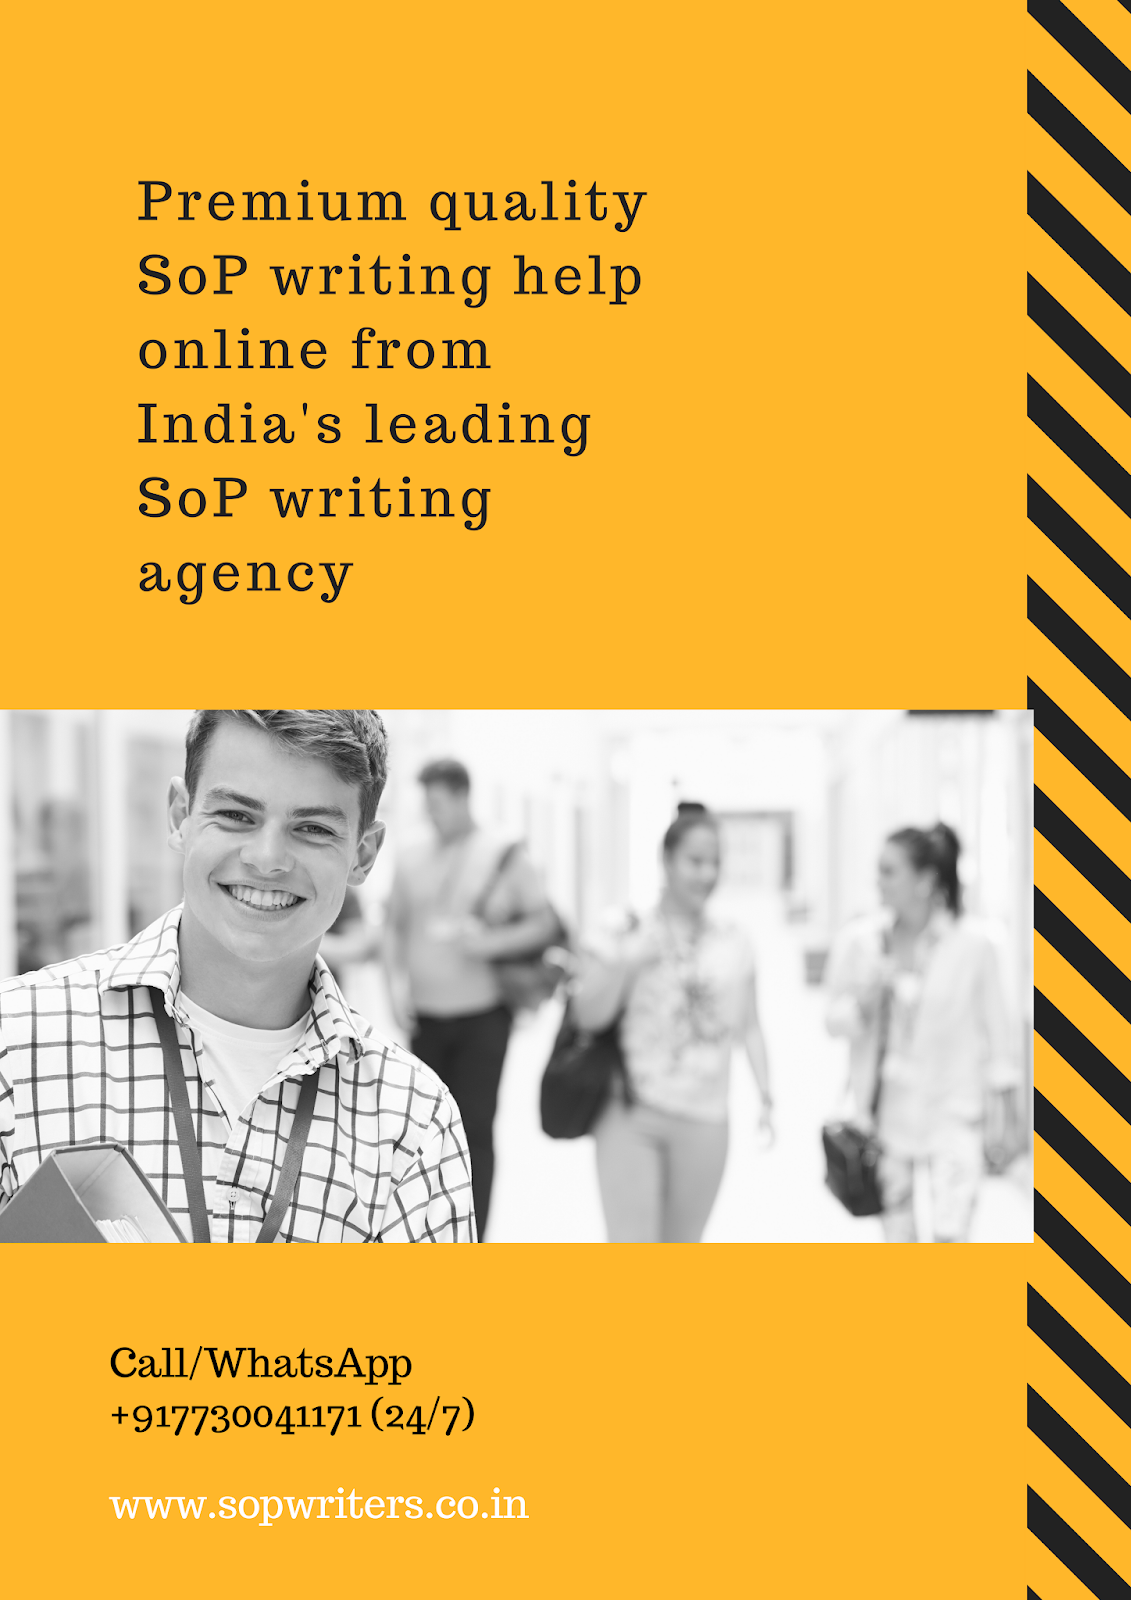 Sop writing services in kerala